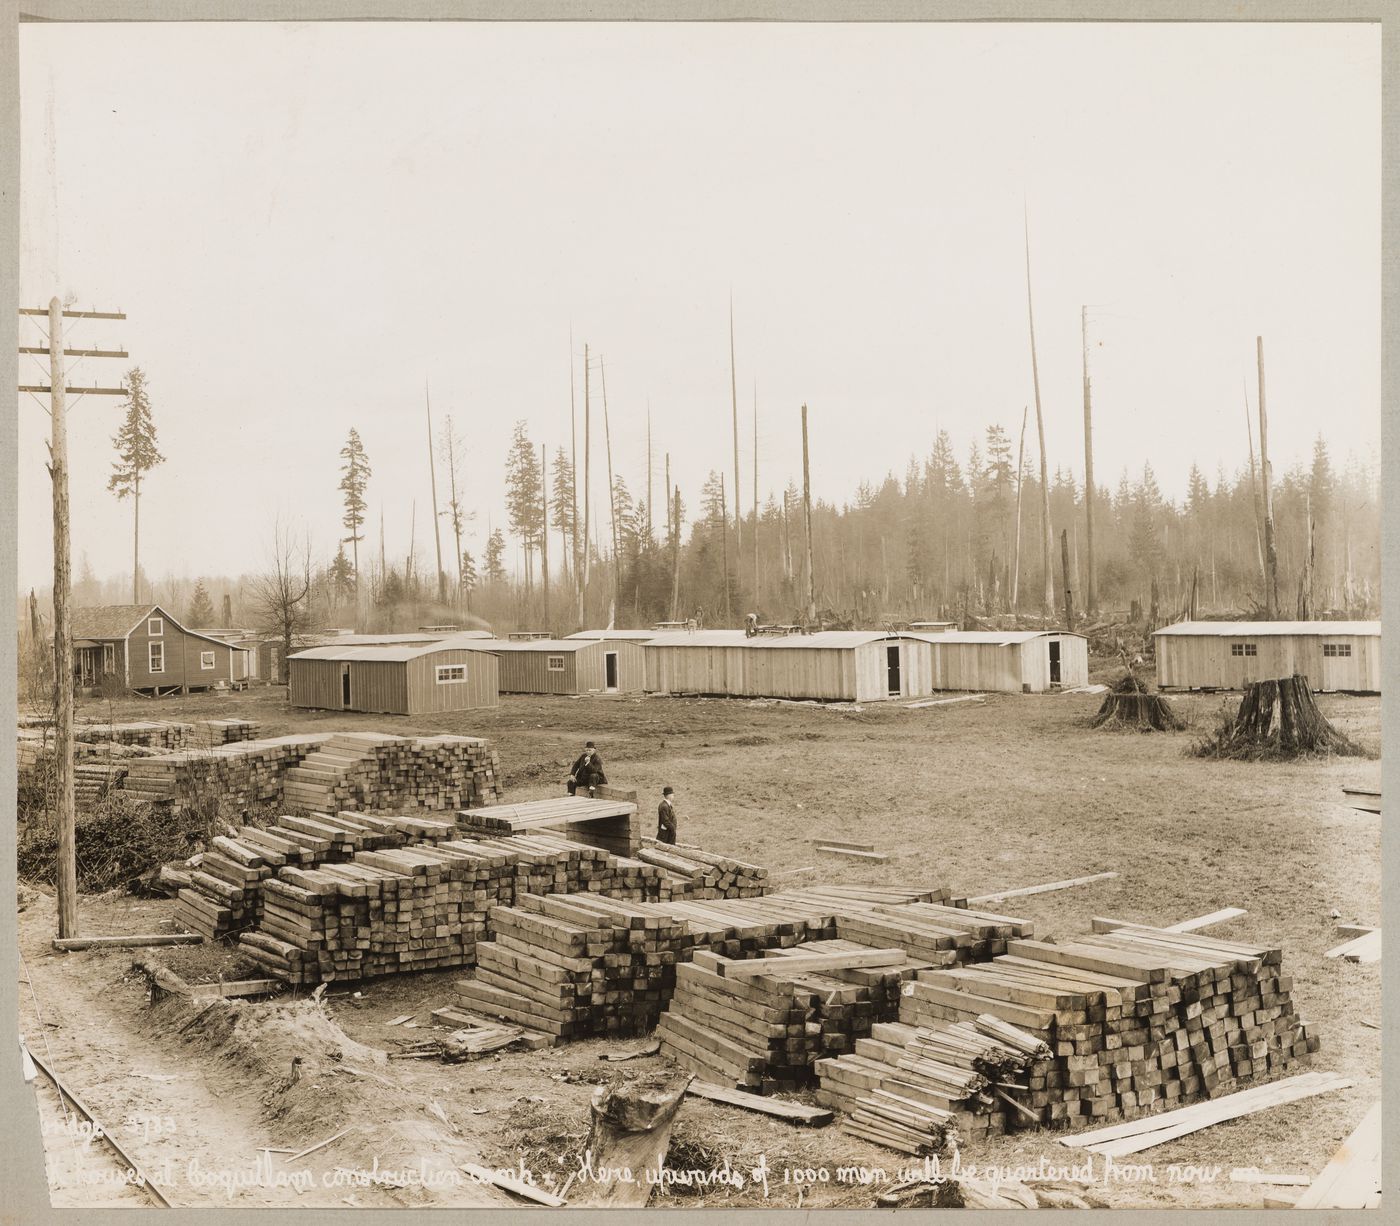 View of the Canadian Pacific Railroad Company construction camp showing barracks and railway ties, Coquitlam (now Port Coquitlam), British Columbia